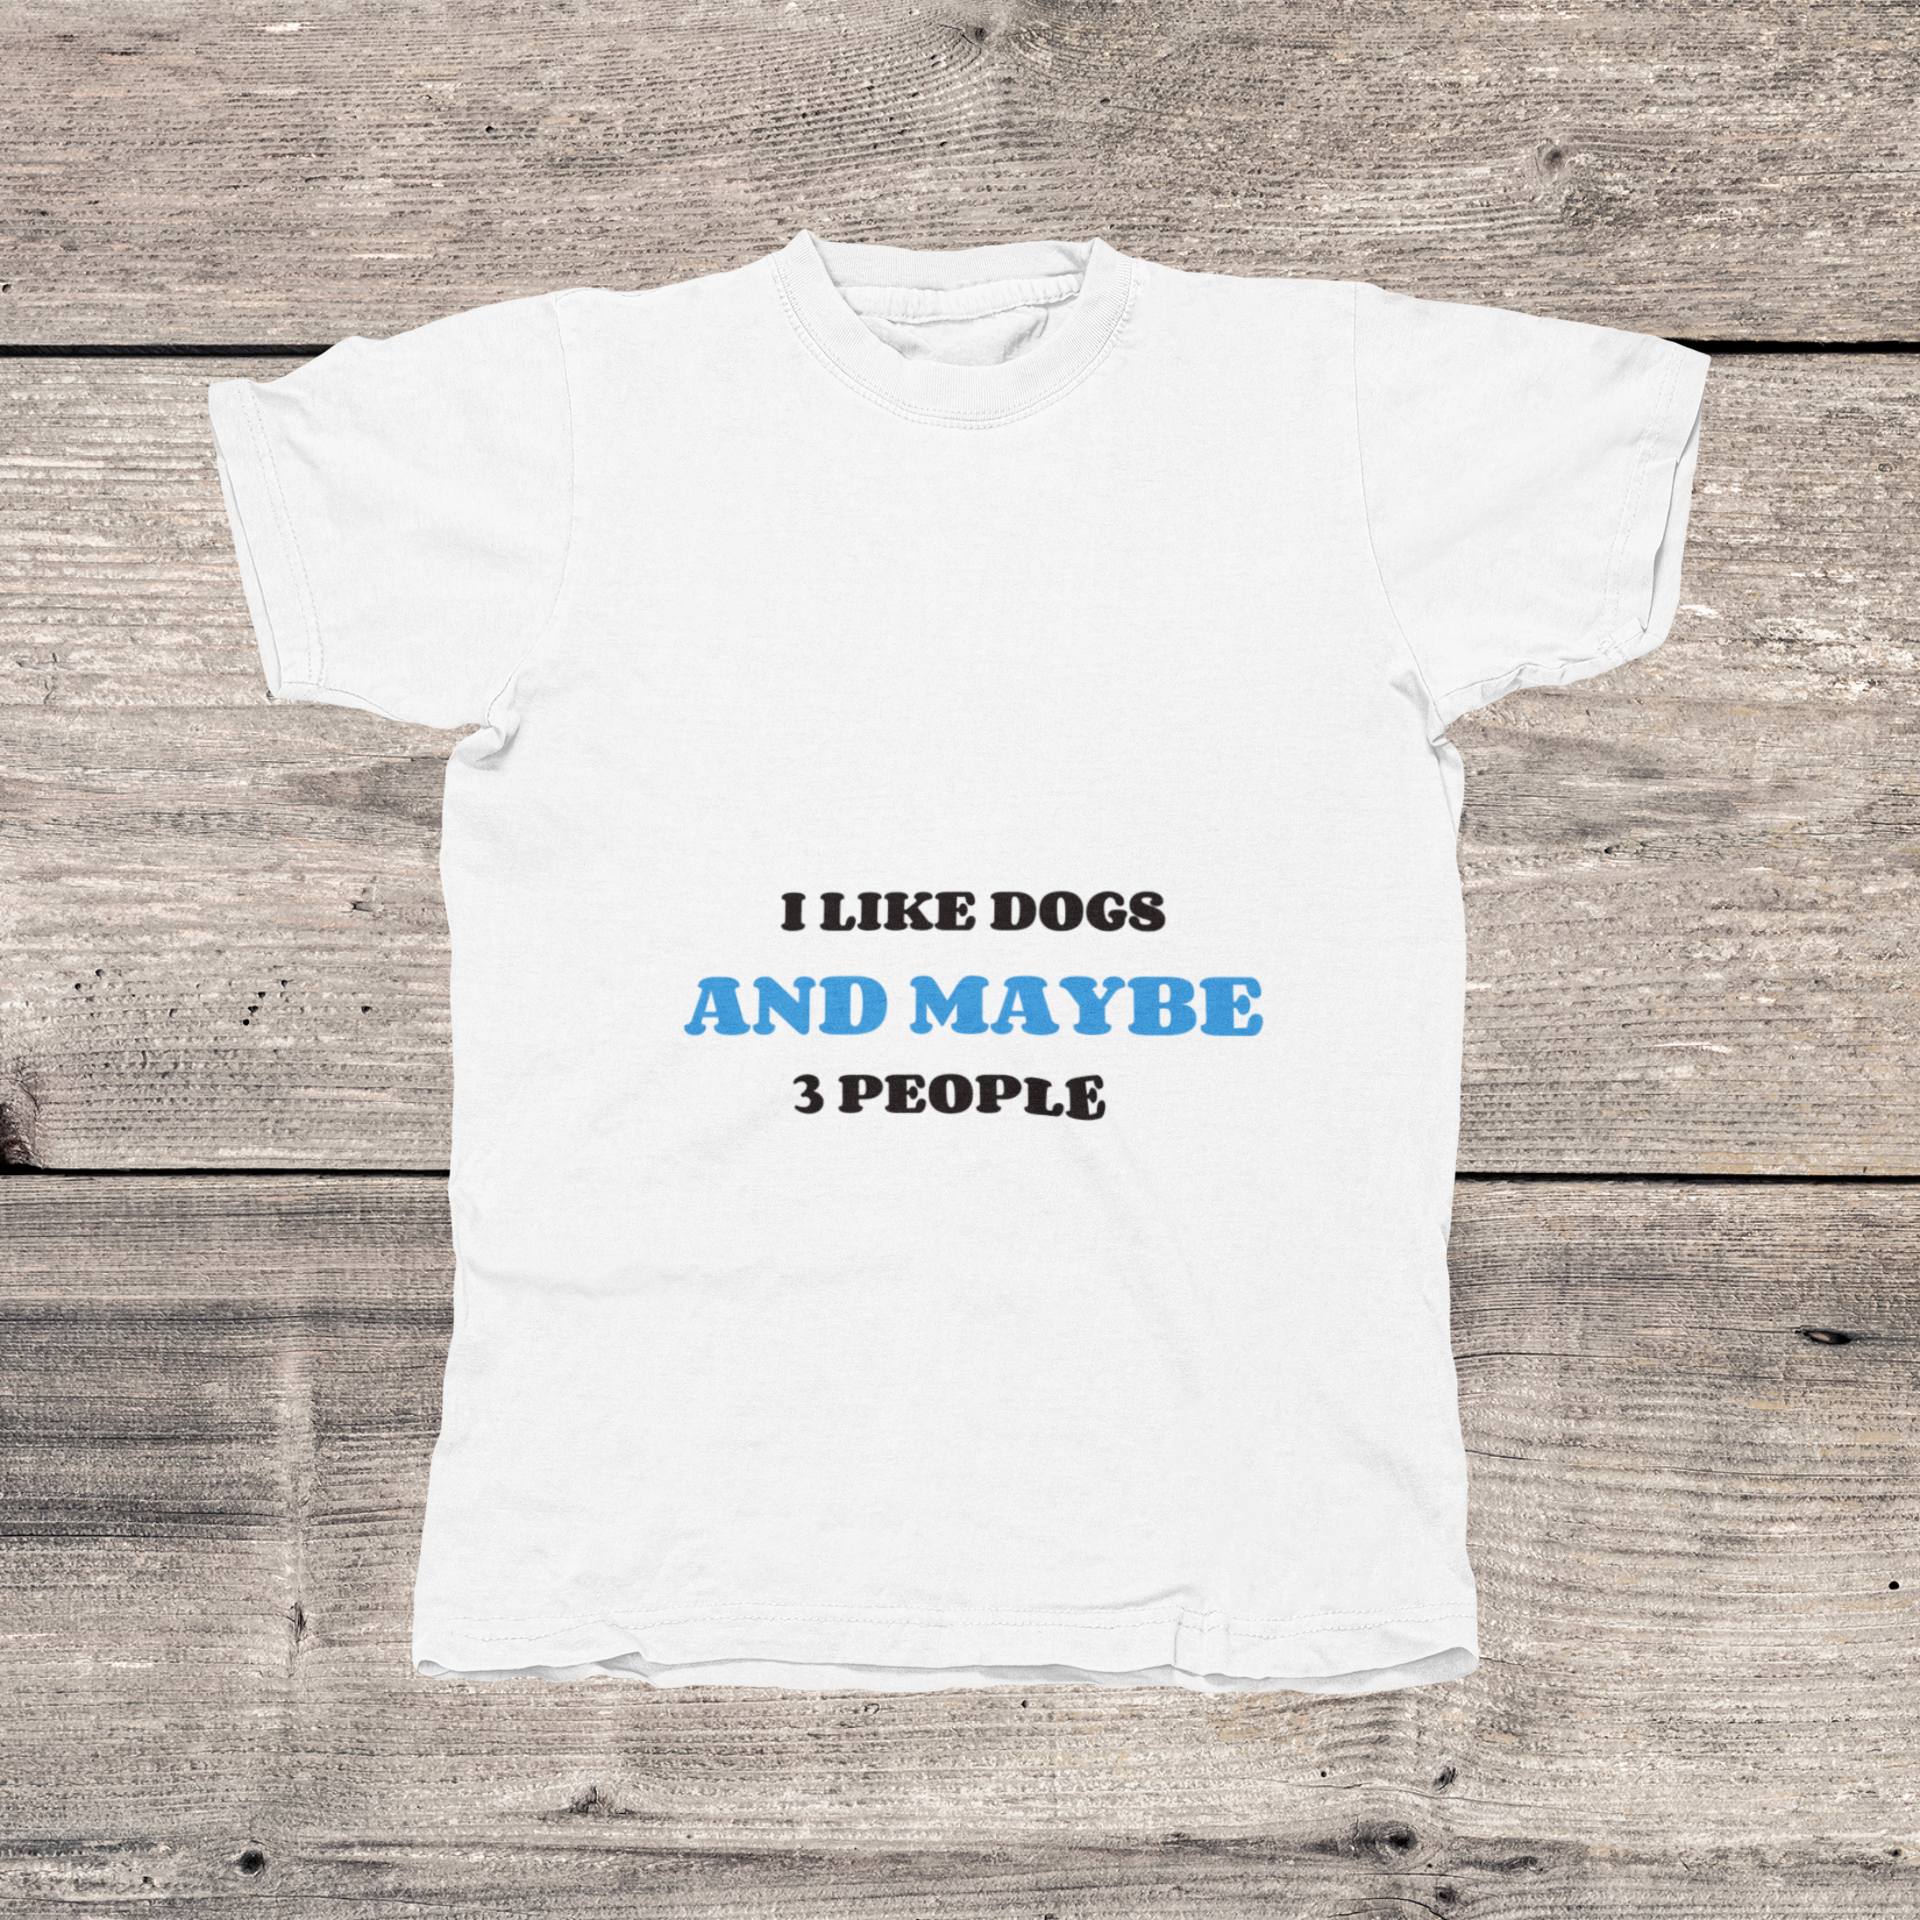 T-Shirt - I Like Dogs And Maybe 3 People